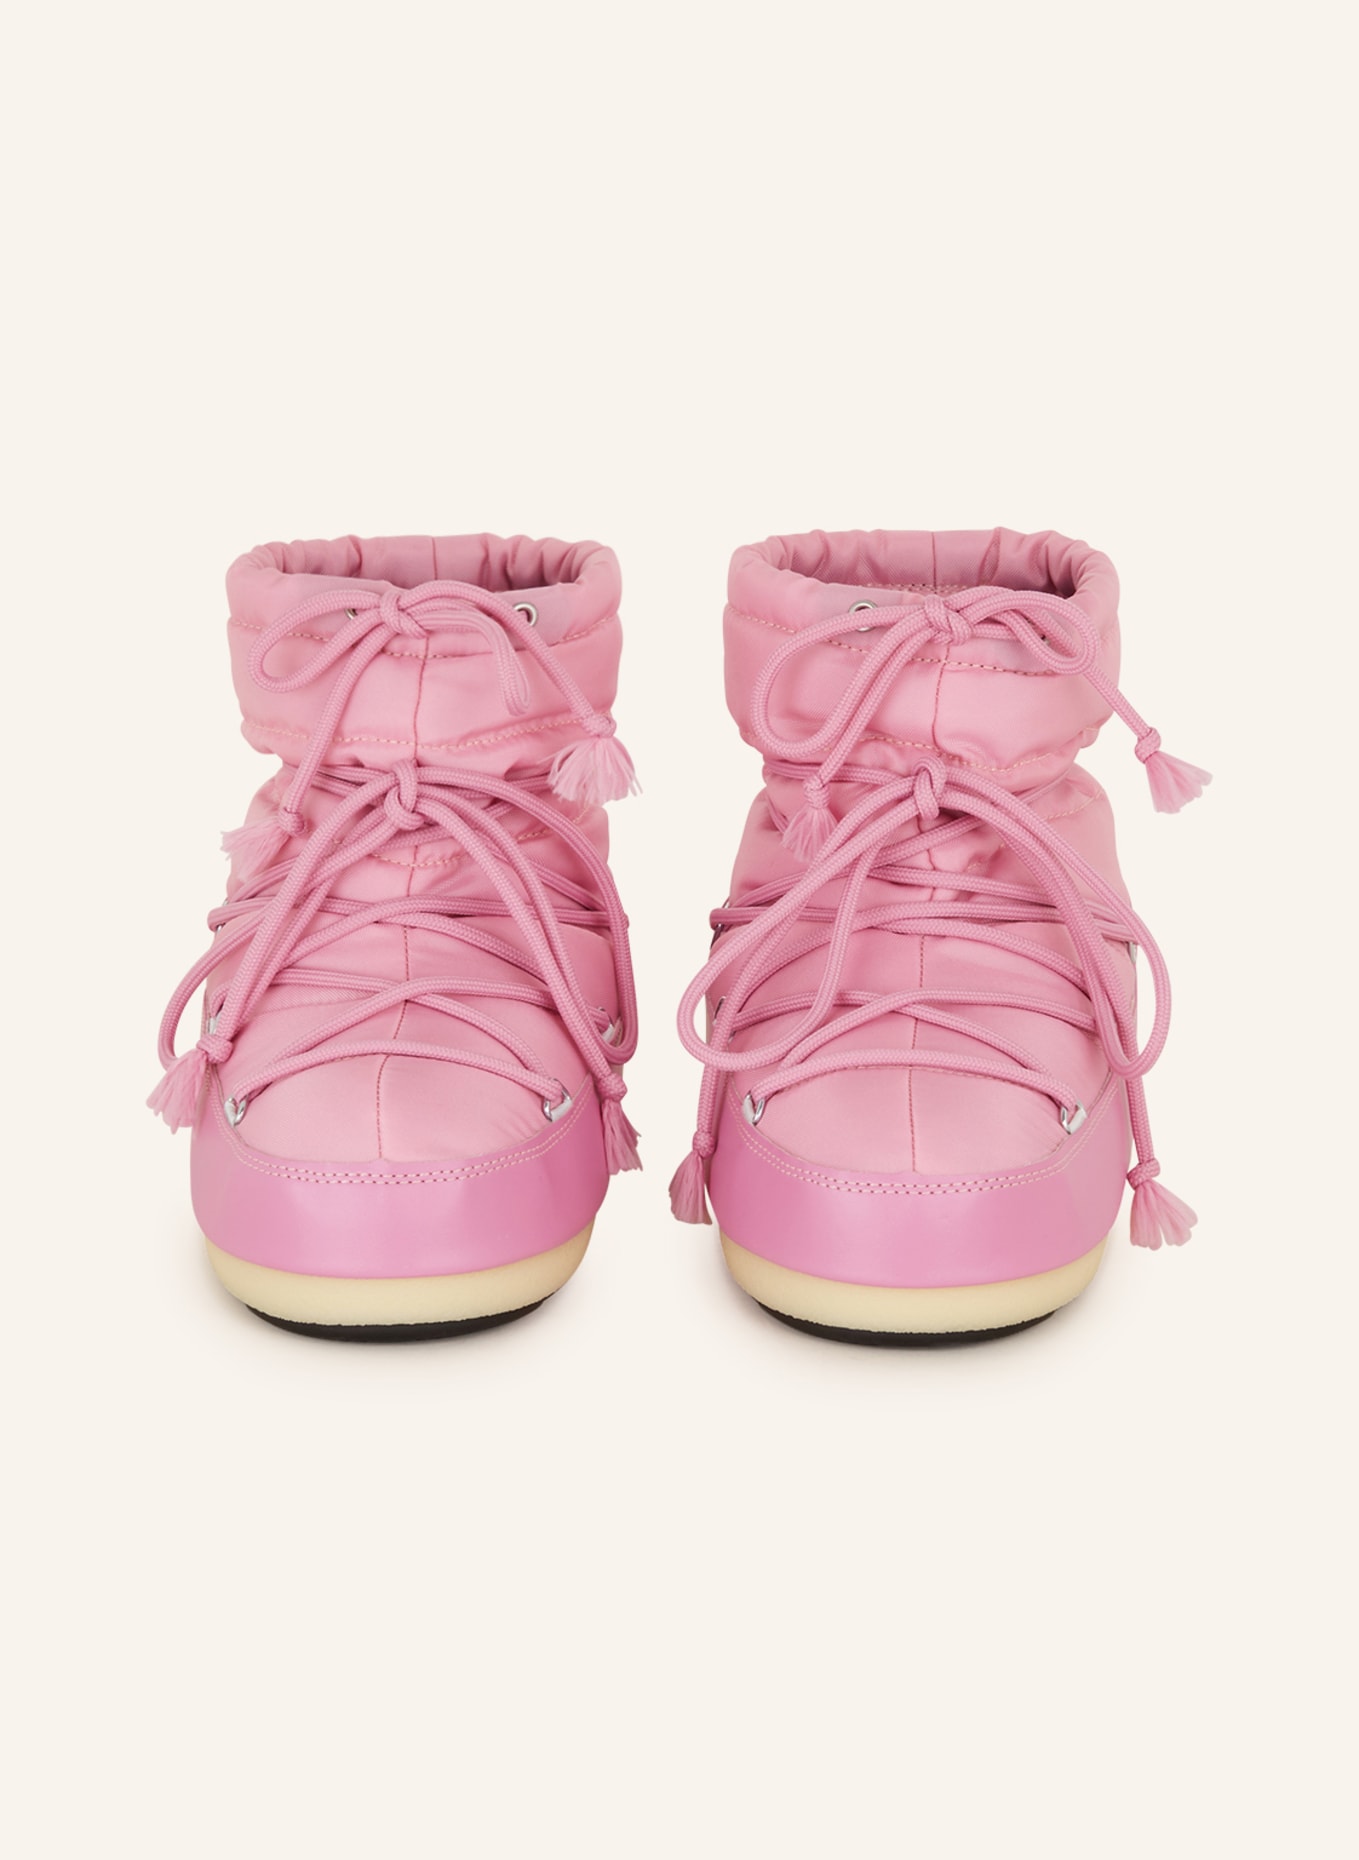 MOON BOOT Moon Boots ICON LOW, Farbe: PINK (Bild 3)